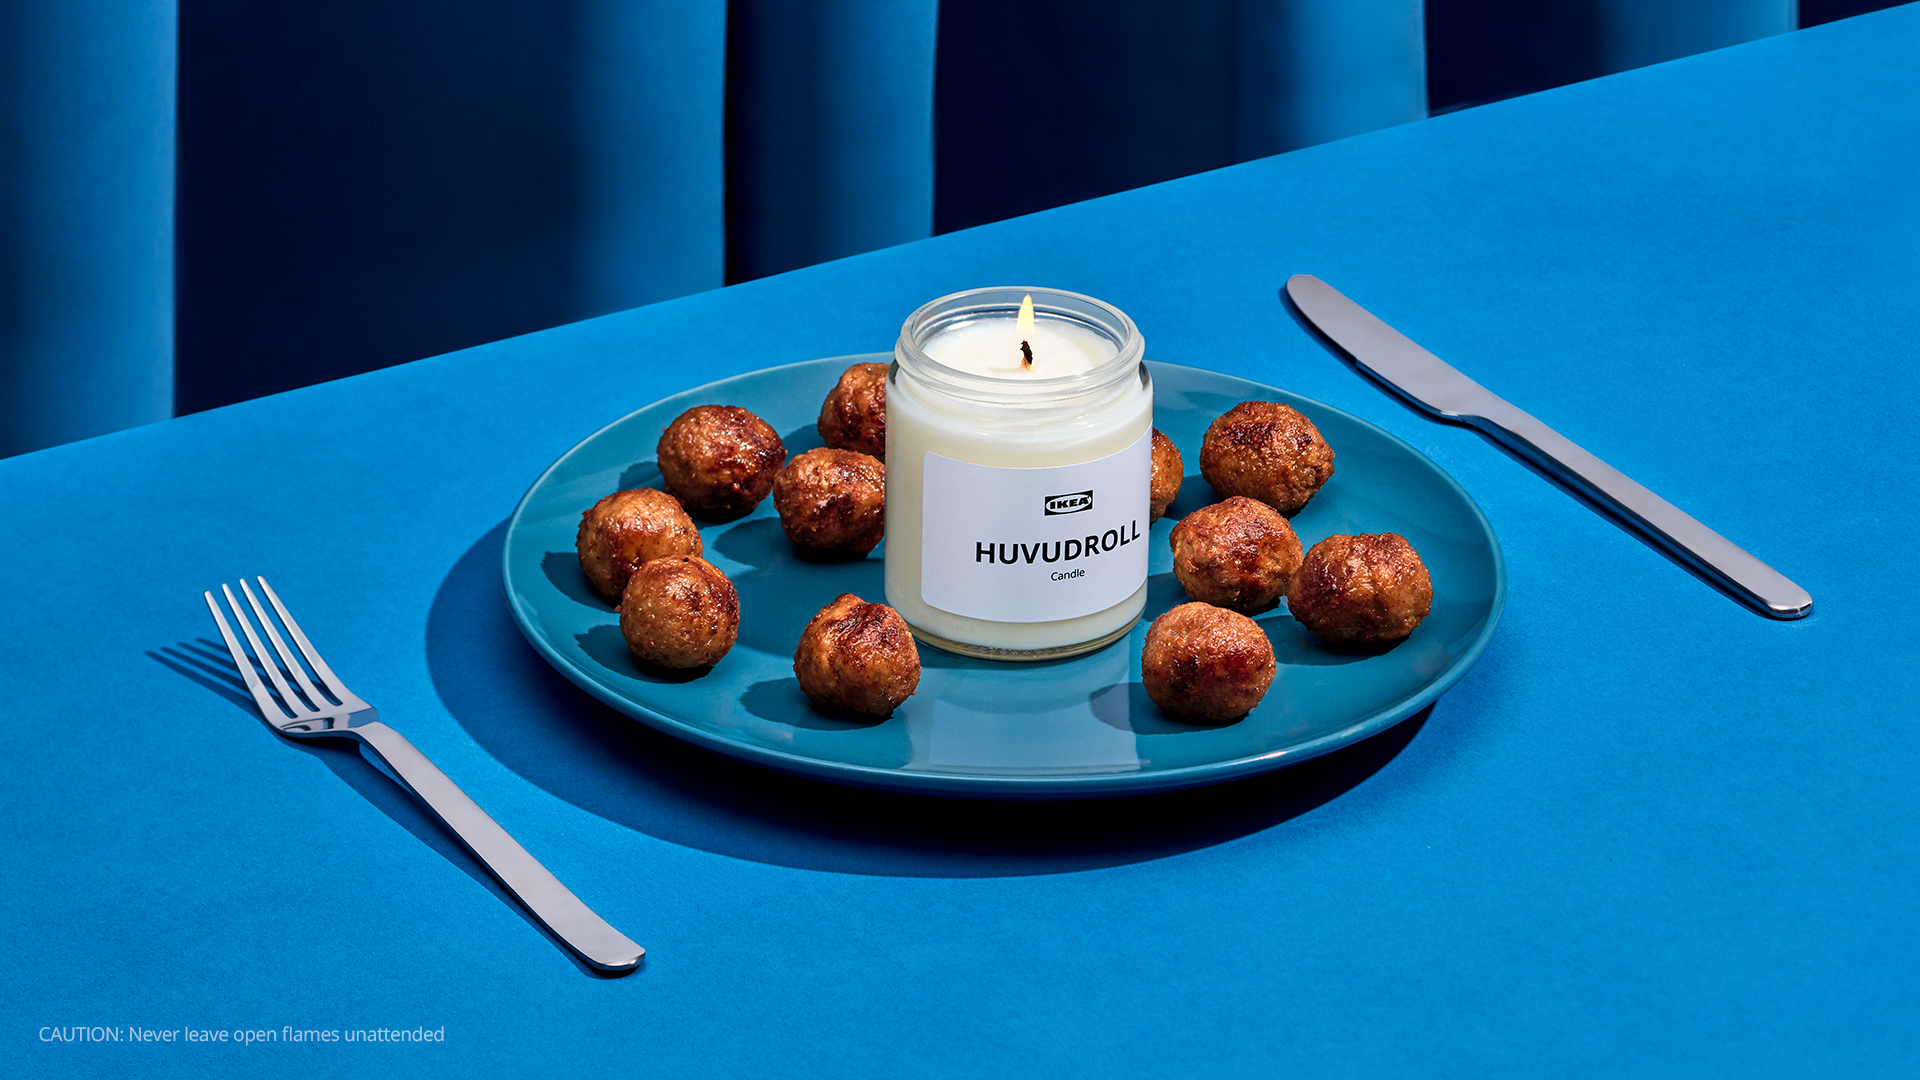 Ikea Releases The Meatball Candle No One Asked For Fragrance News